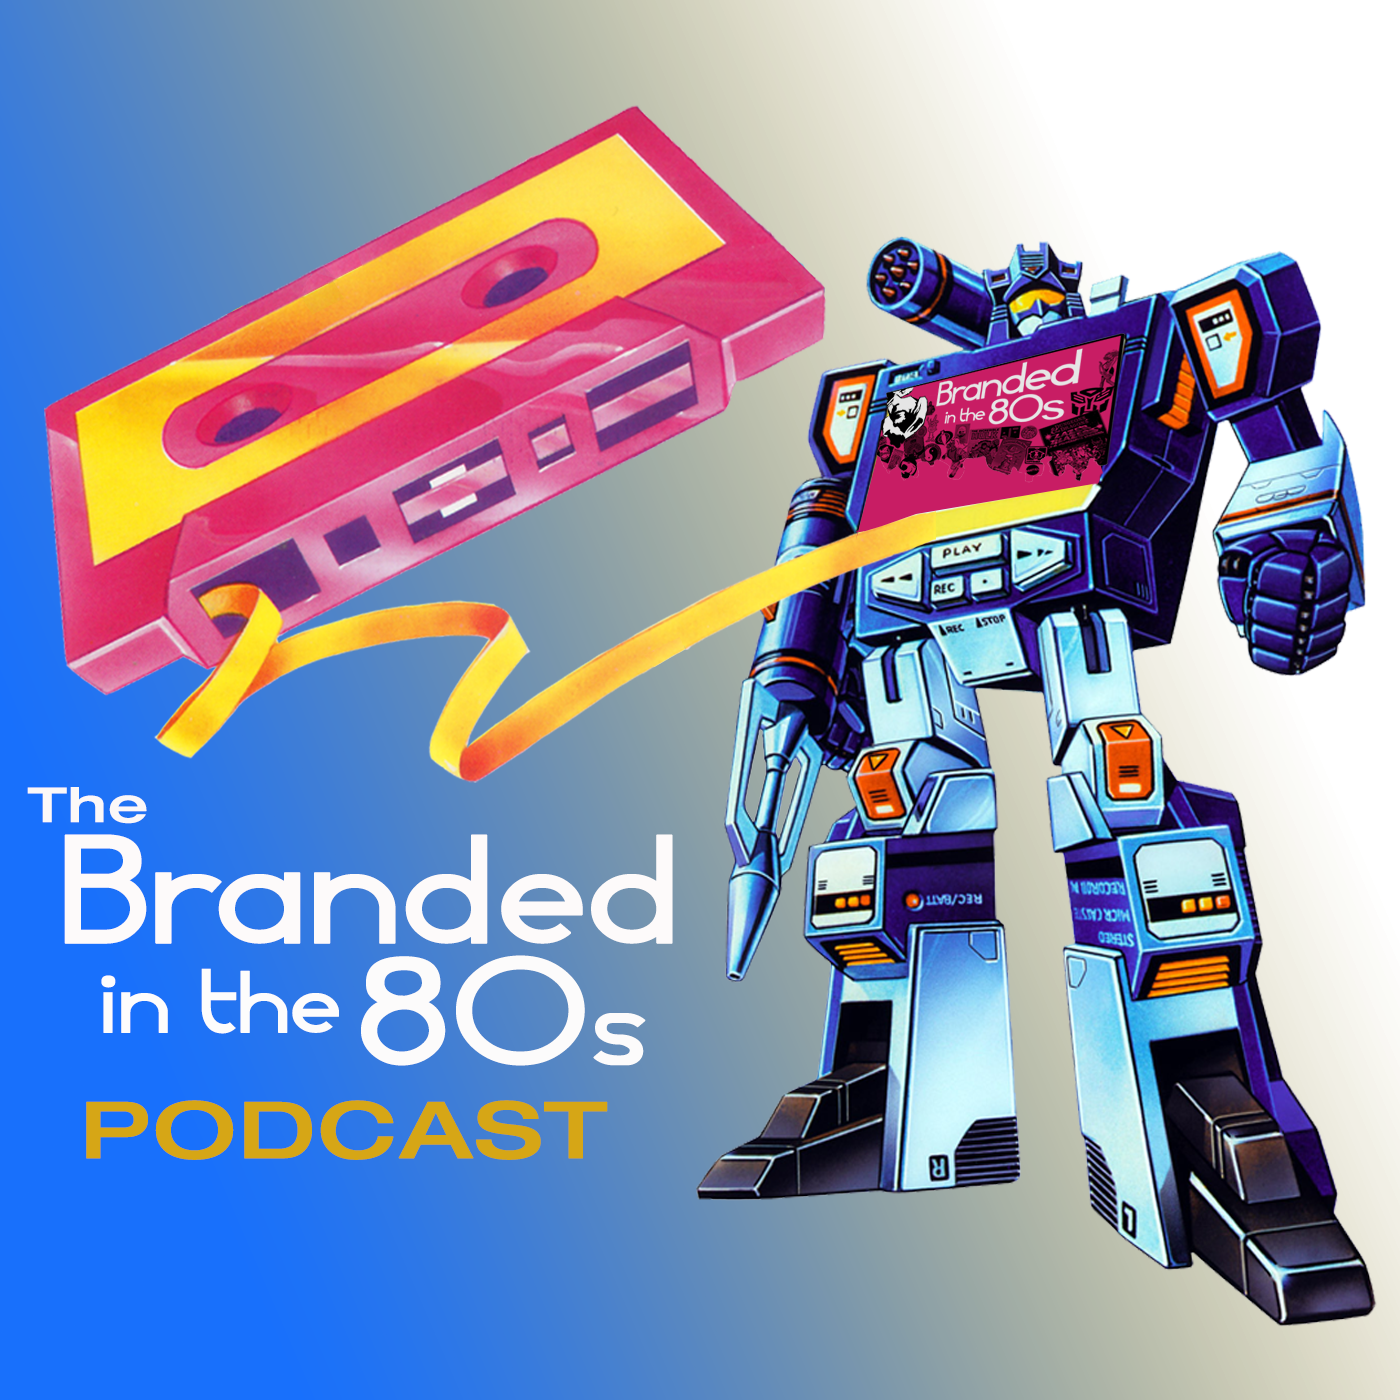 The All New Branded in the 80s podcast, Episode 7!